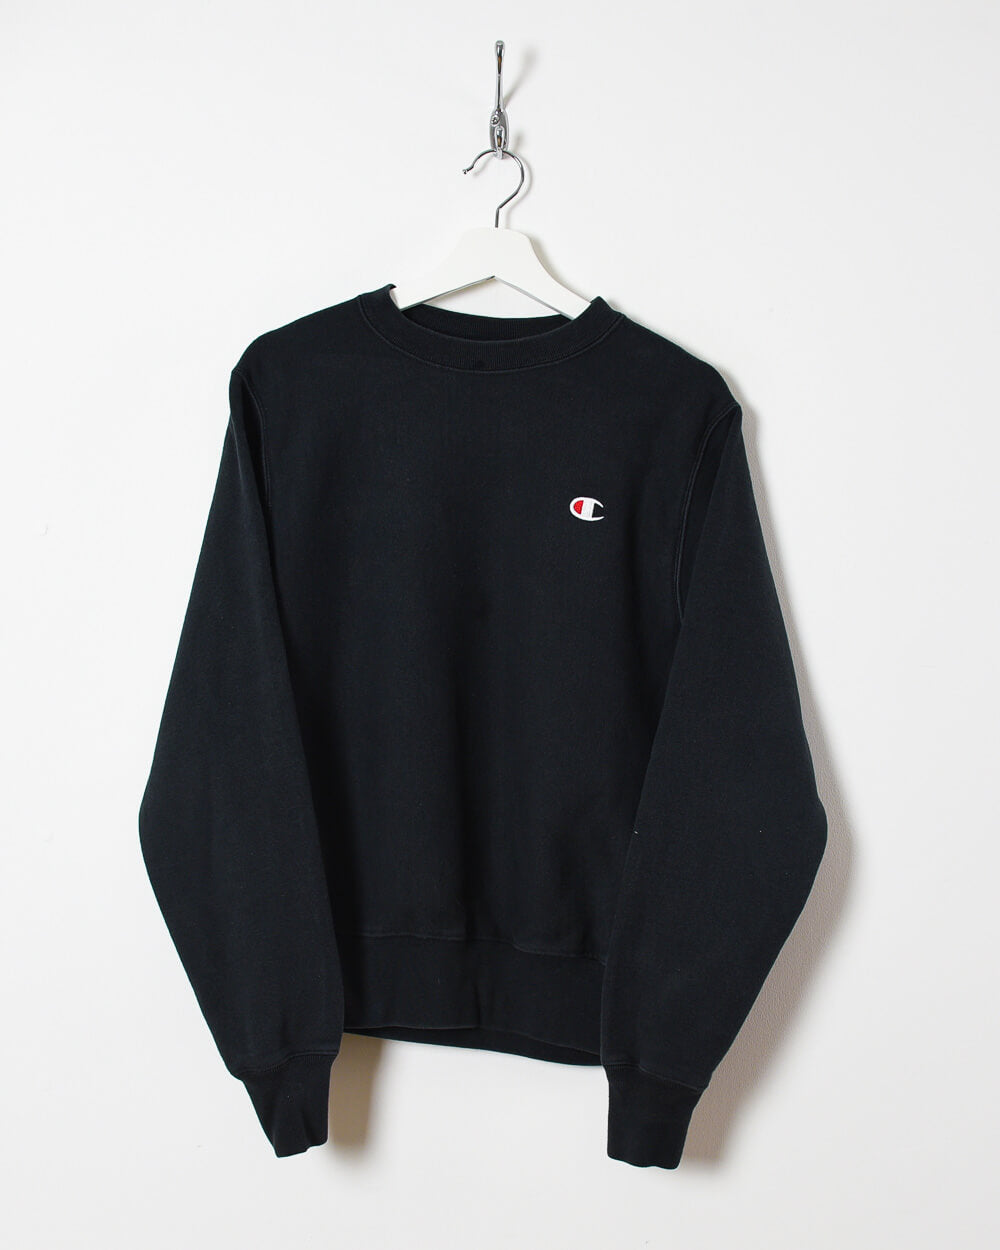 Champion Reverse Weave Sweatshirt - Small - Domno Vintage 90s, 80s, 00s Retro and Vintage Clothing 